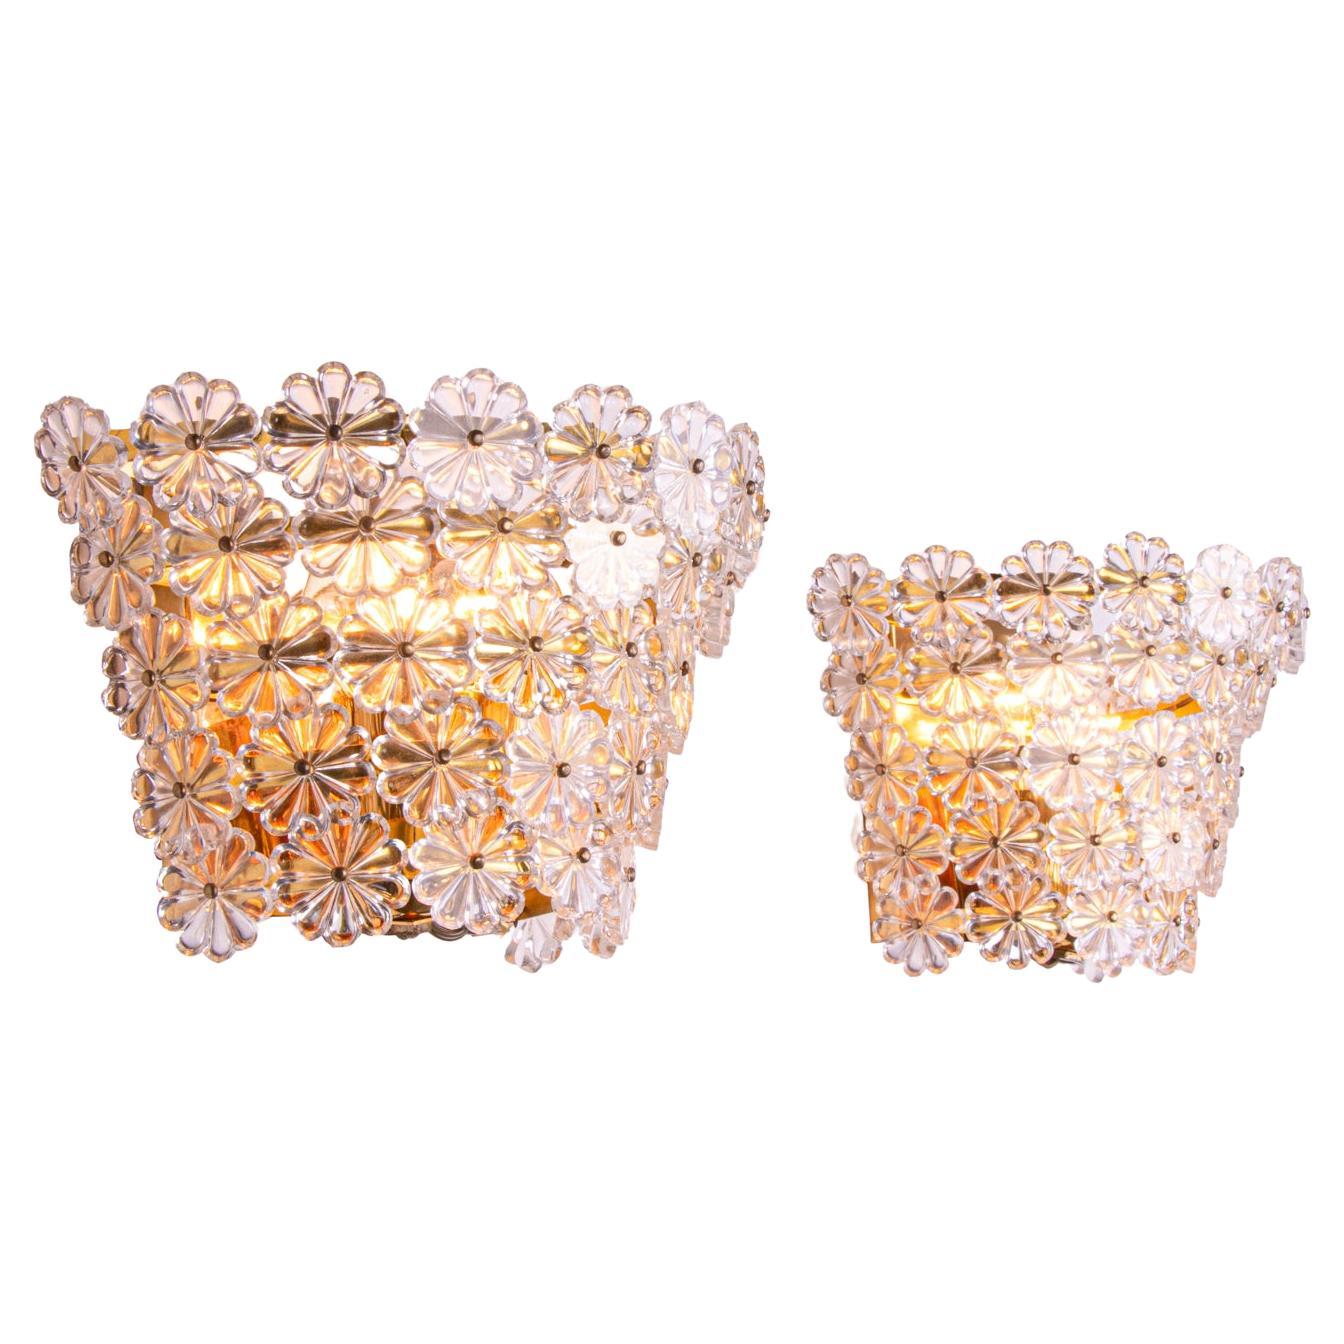 Pair of Gold-Plated Brass and Crystal Glass Wall Lamps Sconces by Emil Stejnar For Sale